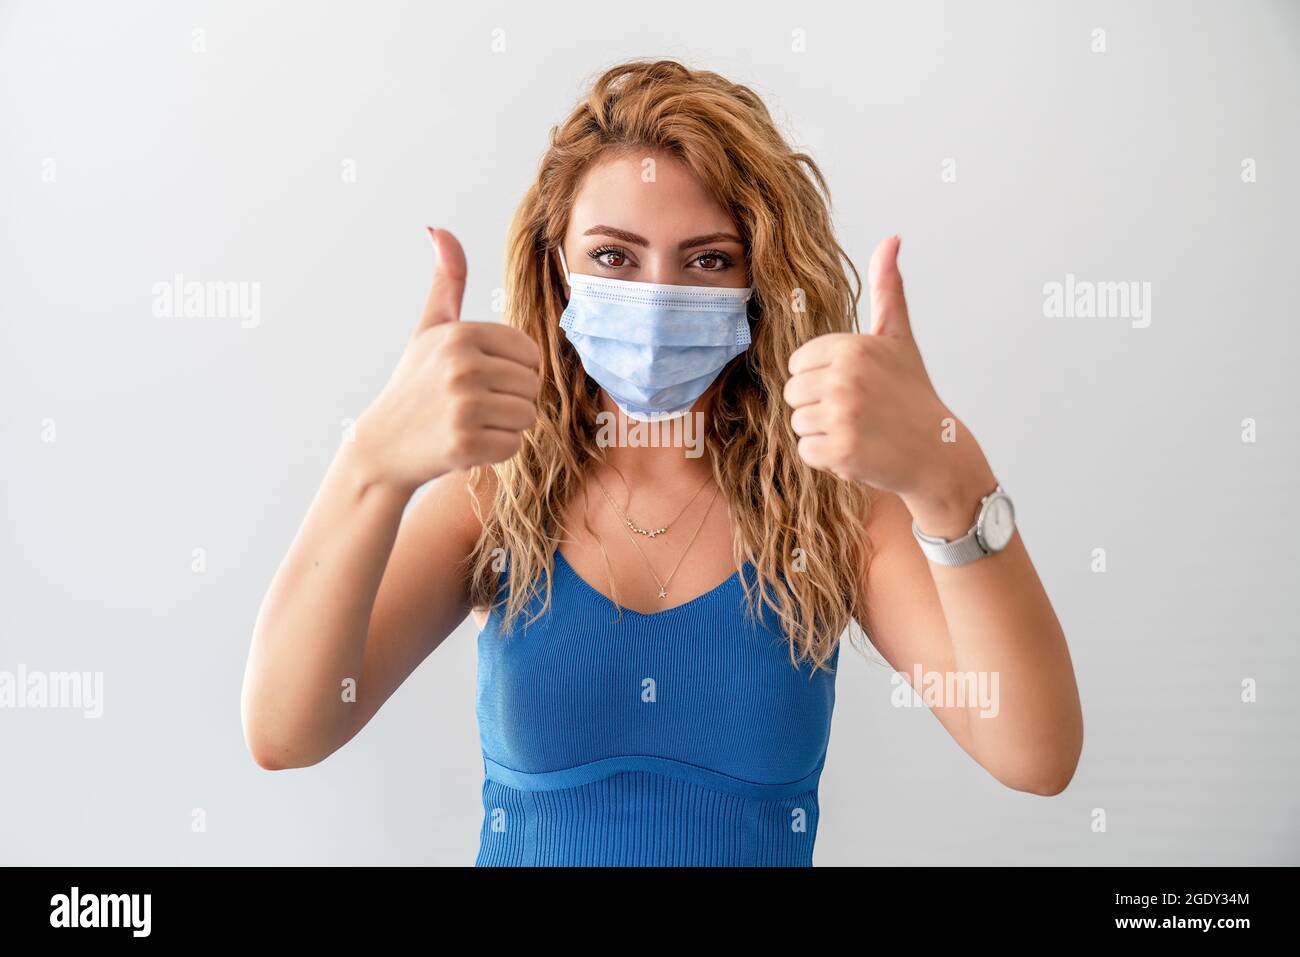 Young woman with a medical mask, protection and precaution for contagious disease. Corona virus outbreaking Stock Photo